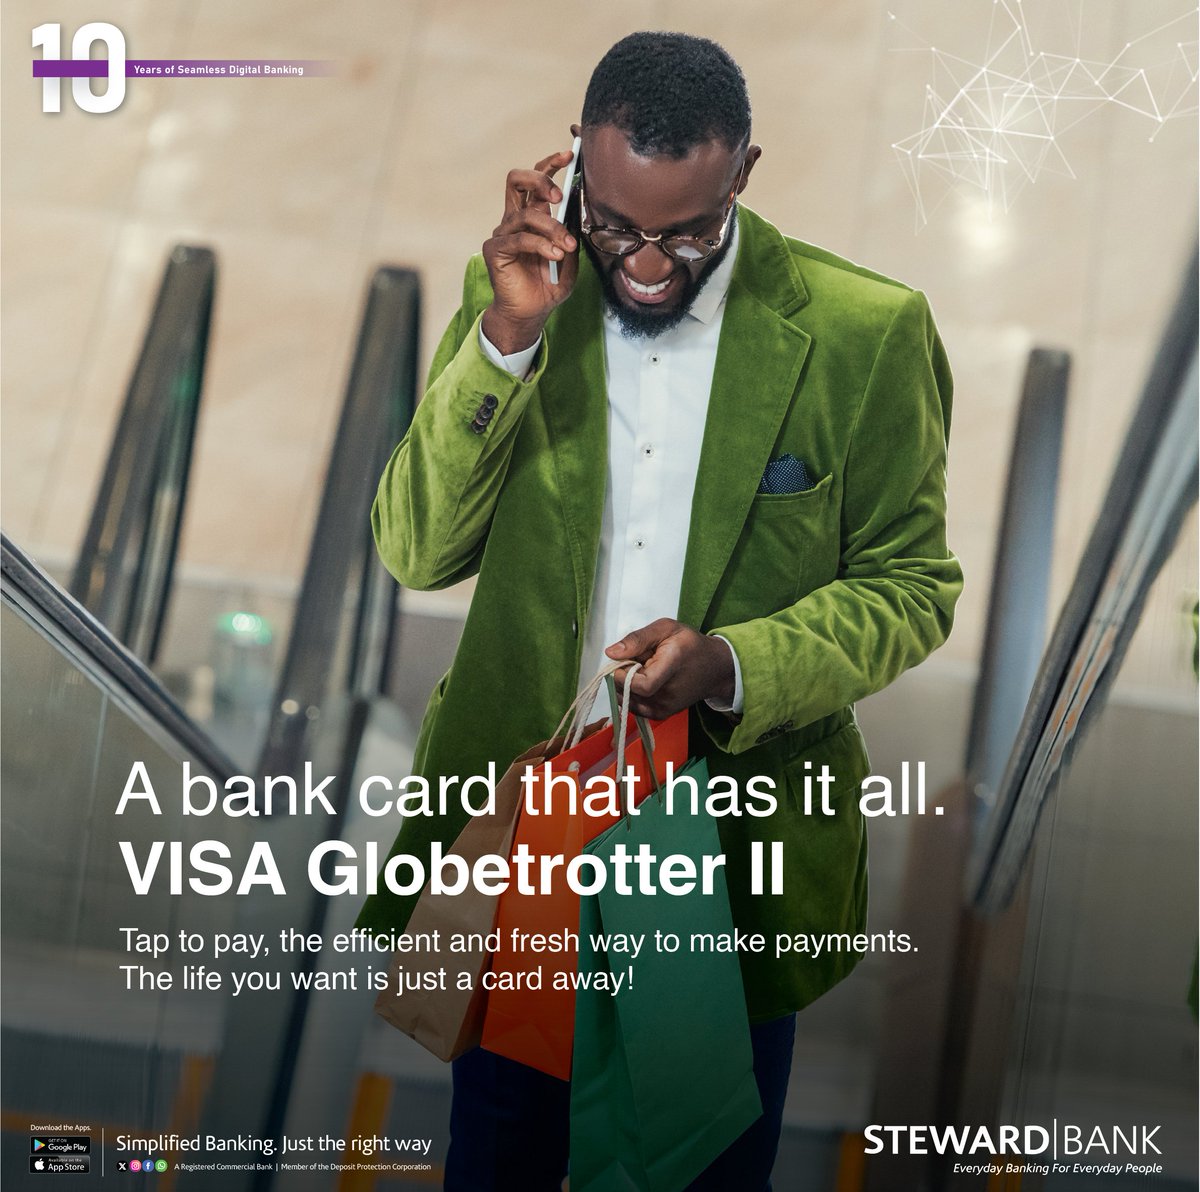 Whether you want to travel, work, study or enjoy entertainment, the Visa Globetrotter II is the perfect choice for you. It combines style, convenience & security! No card? No worries! Get your Visa Globetrotter II at the nearest branch or agent today. #VisaGlobetrotterII